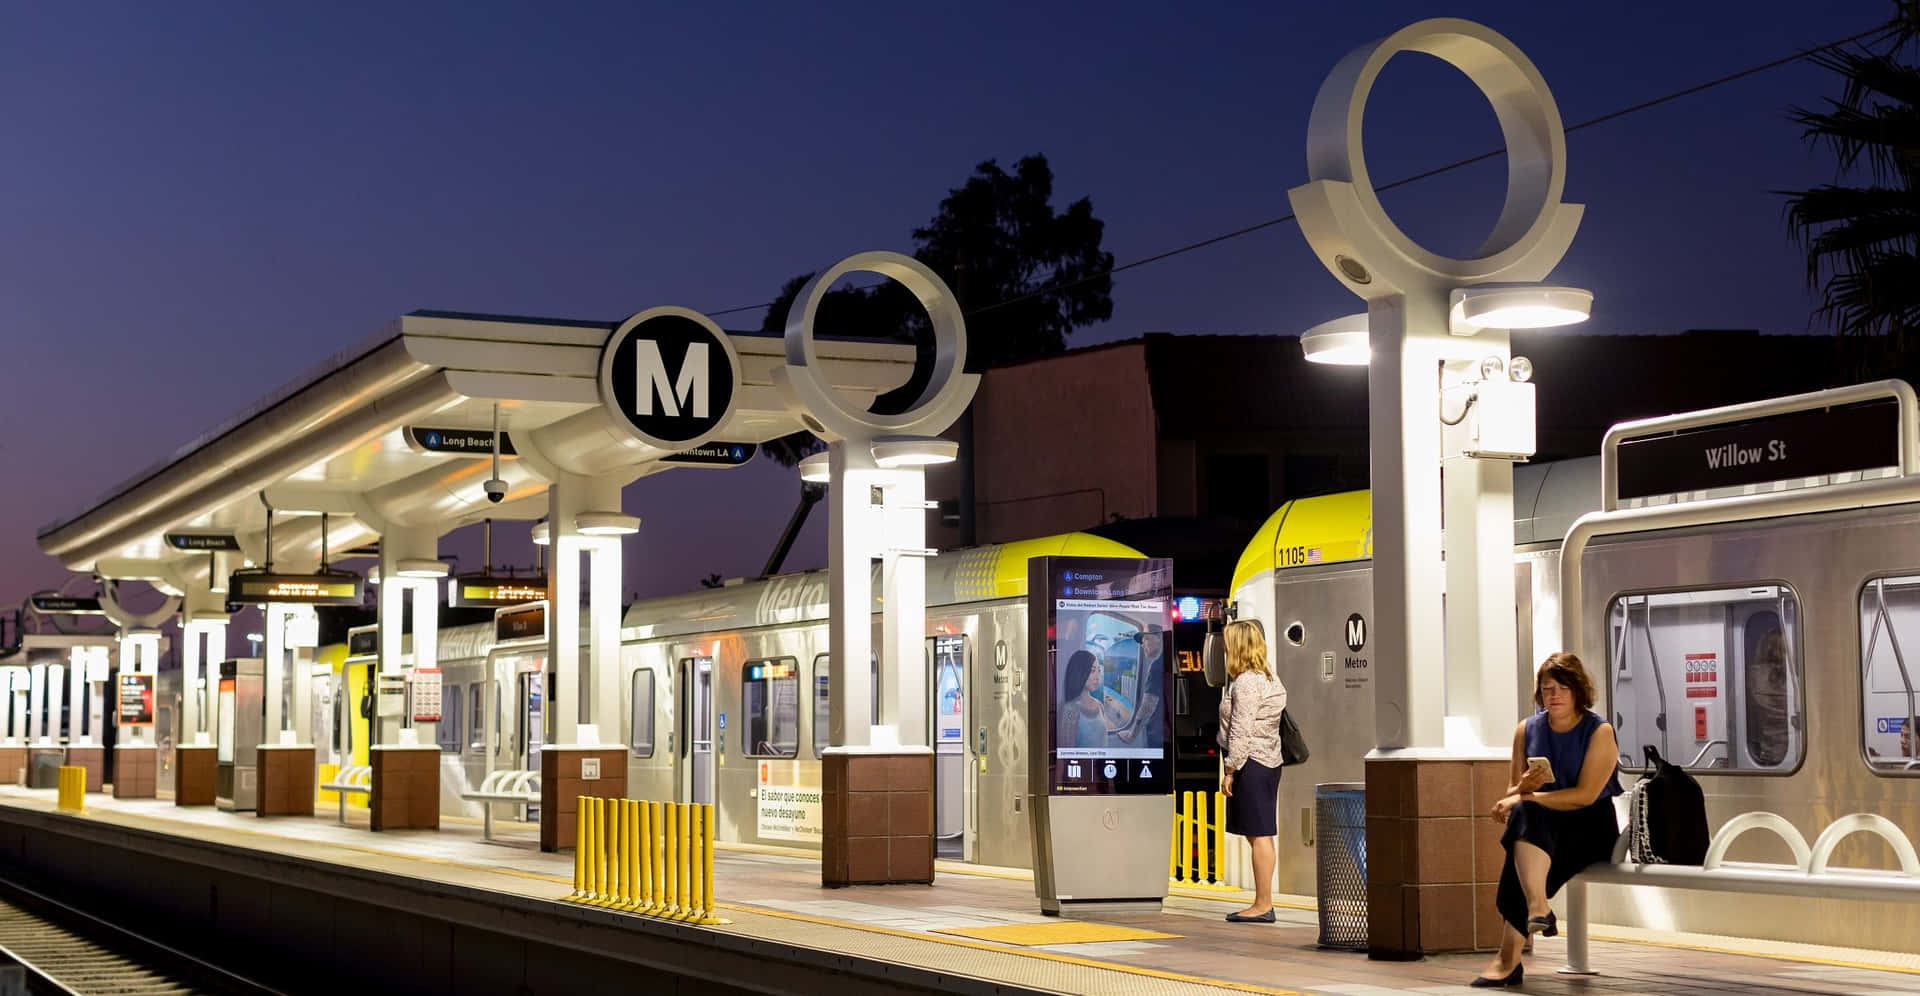 Take in the hustle and bustle of the city with a Metro ride